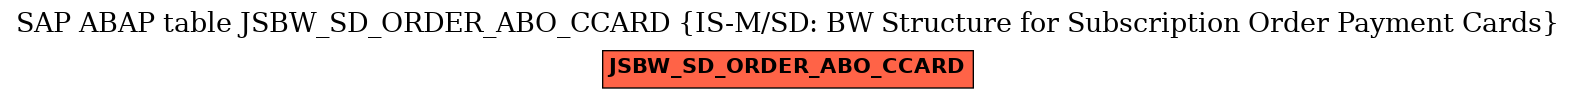 E-R Diagram for table JSBW_SD_ORDER_ABO_CCARD (IS-M/SD: BW Structure for Subscription Order Payment Cards)